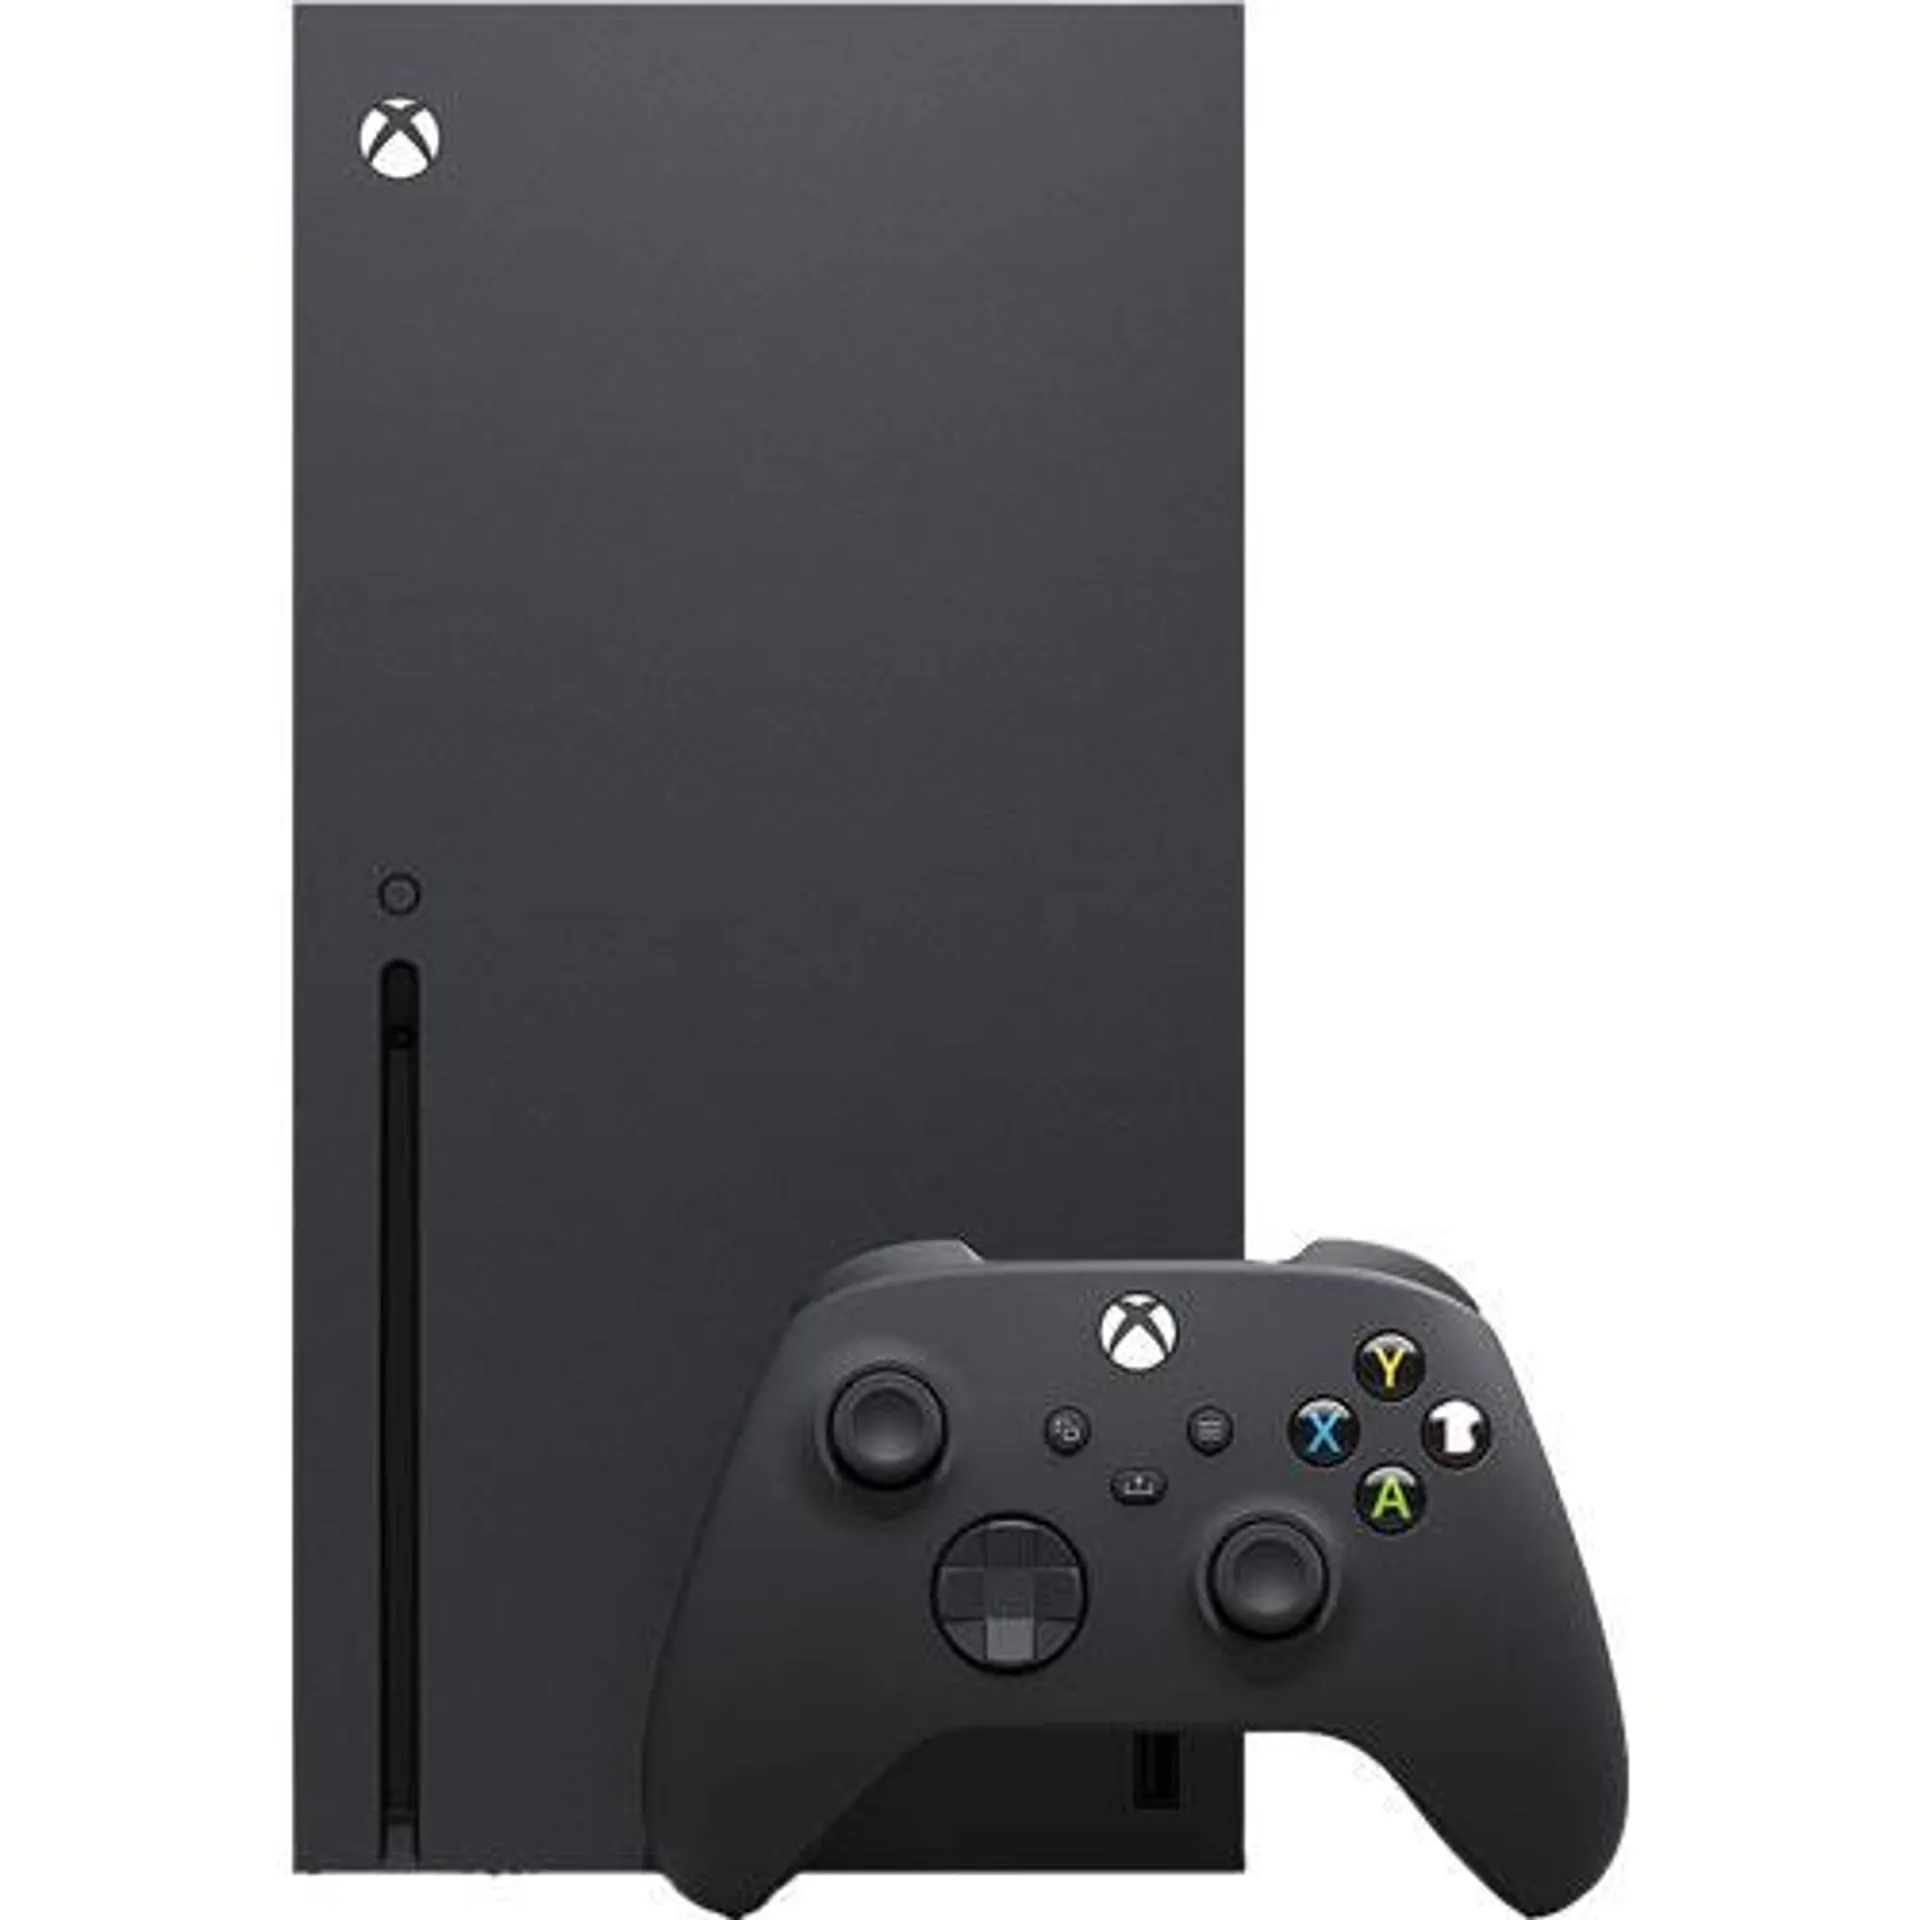 Series X 1TB Game Console